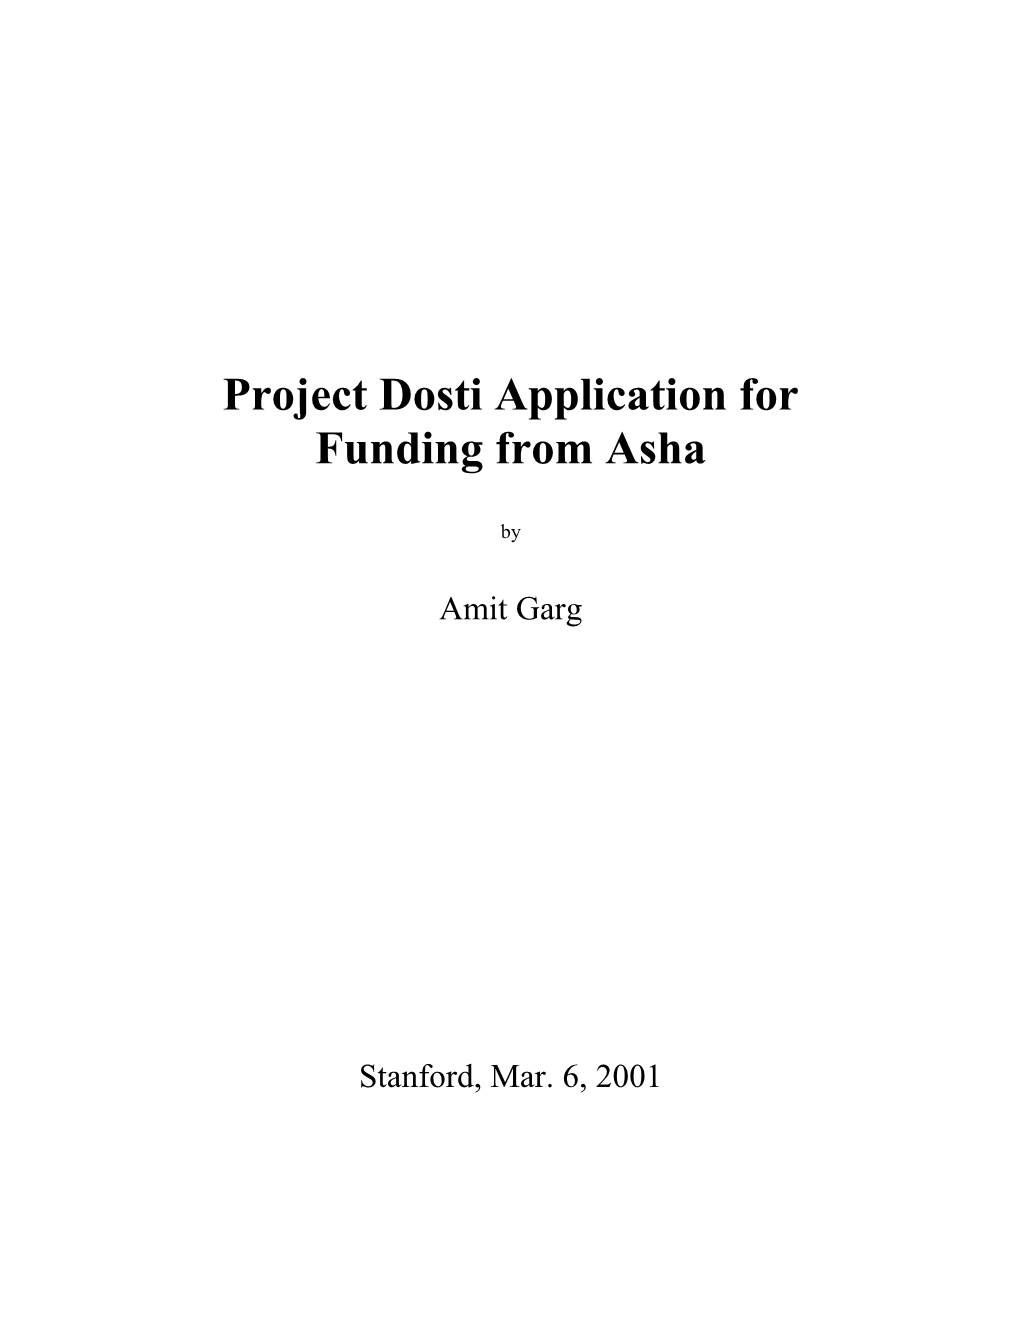 Project Dosti Application for Funding from Asha